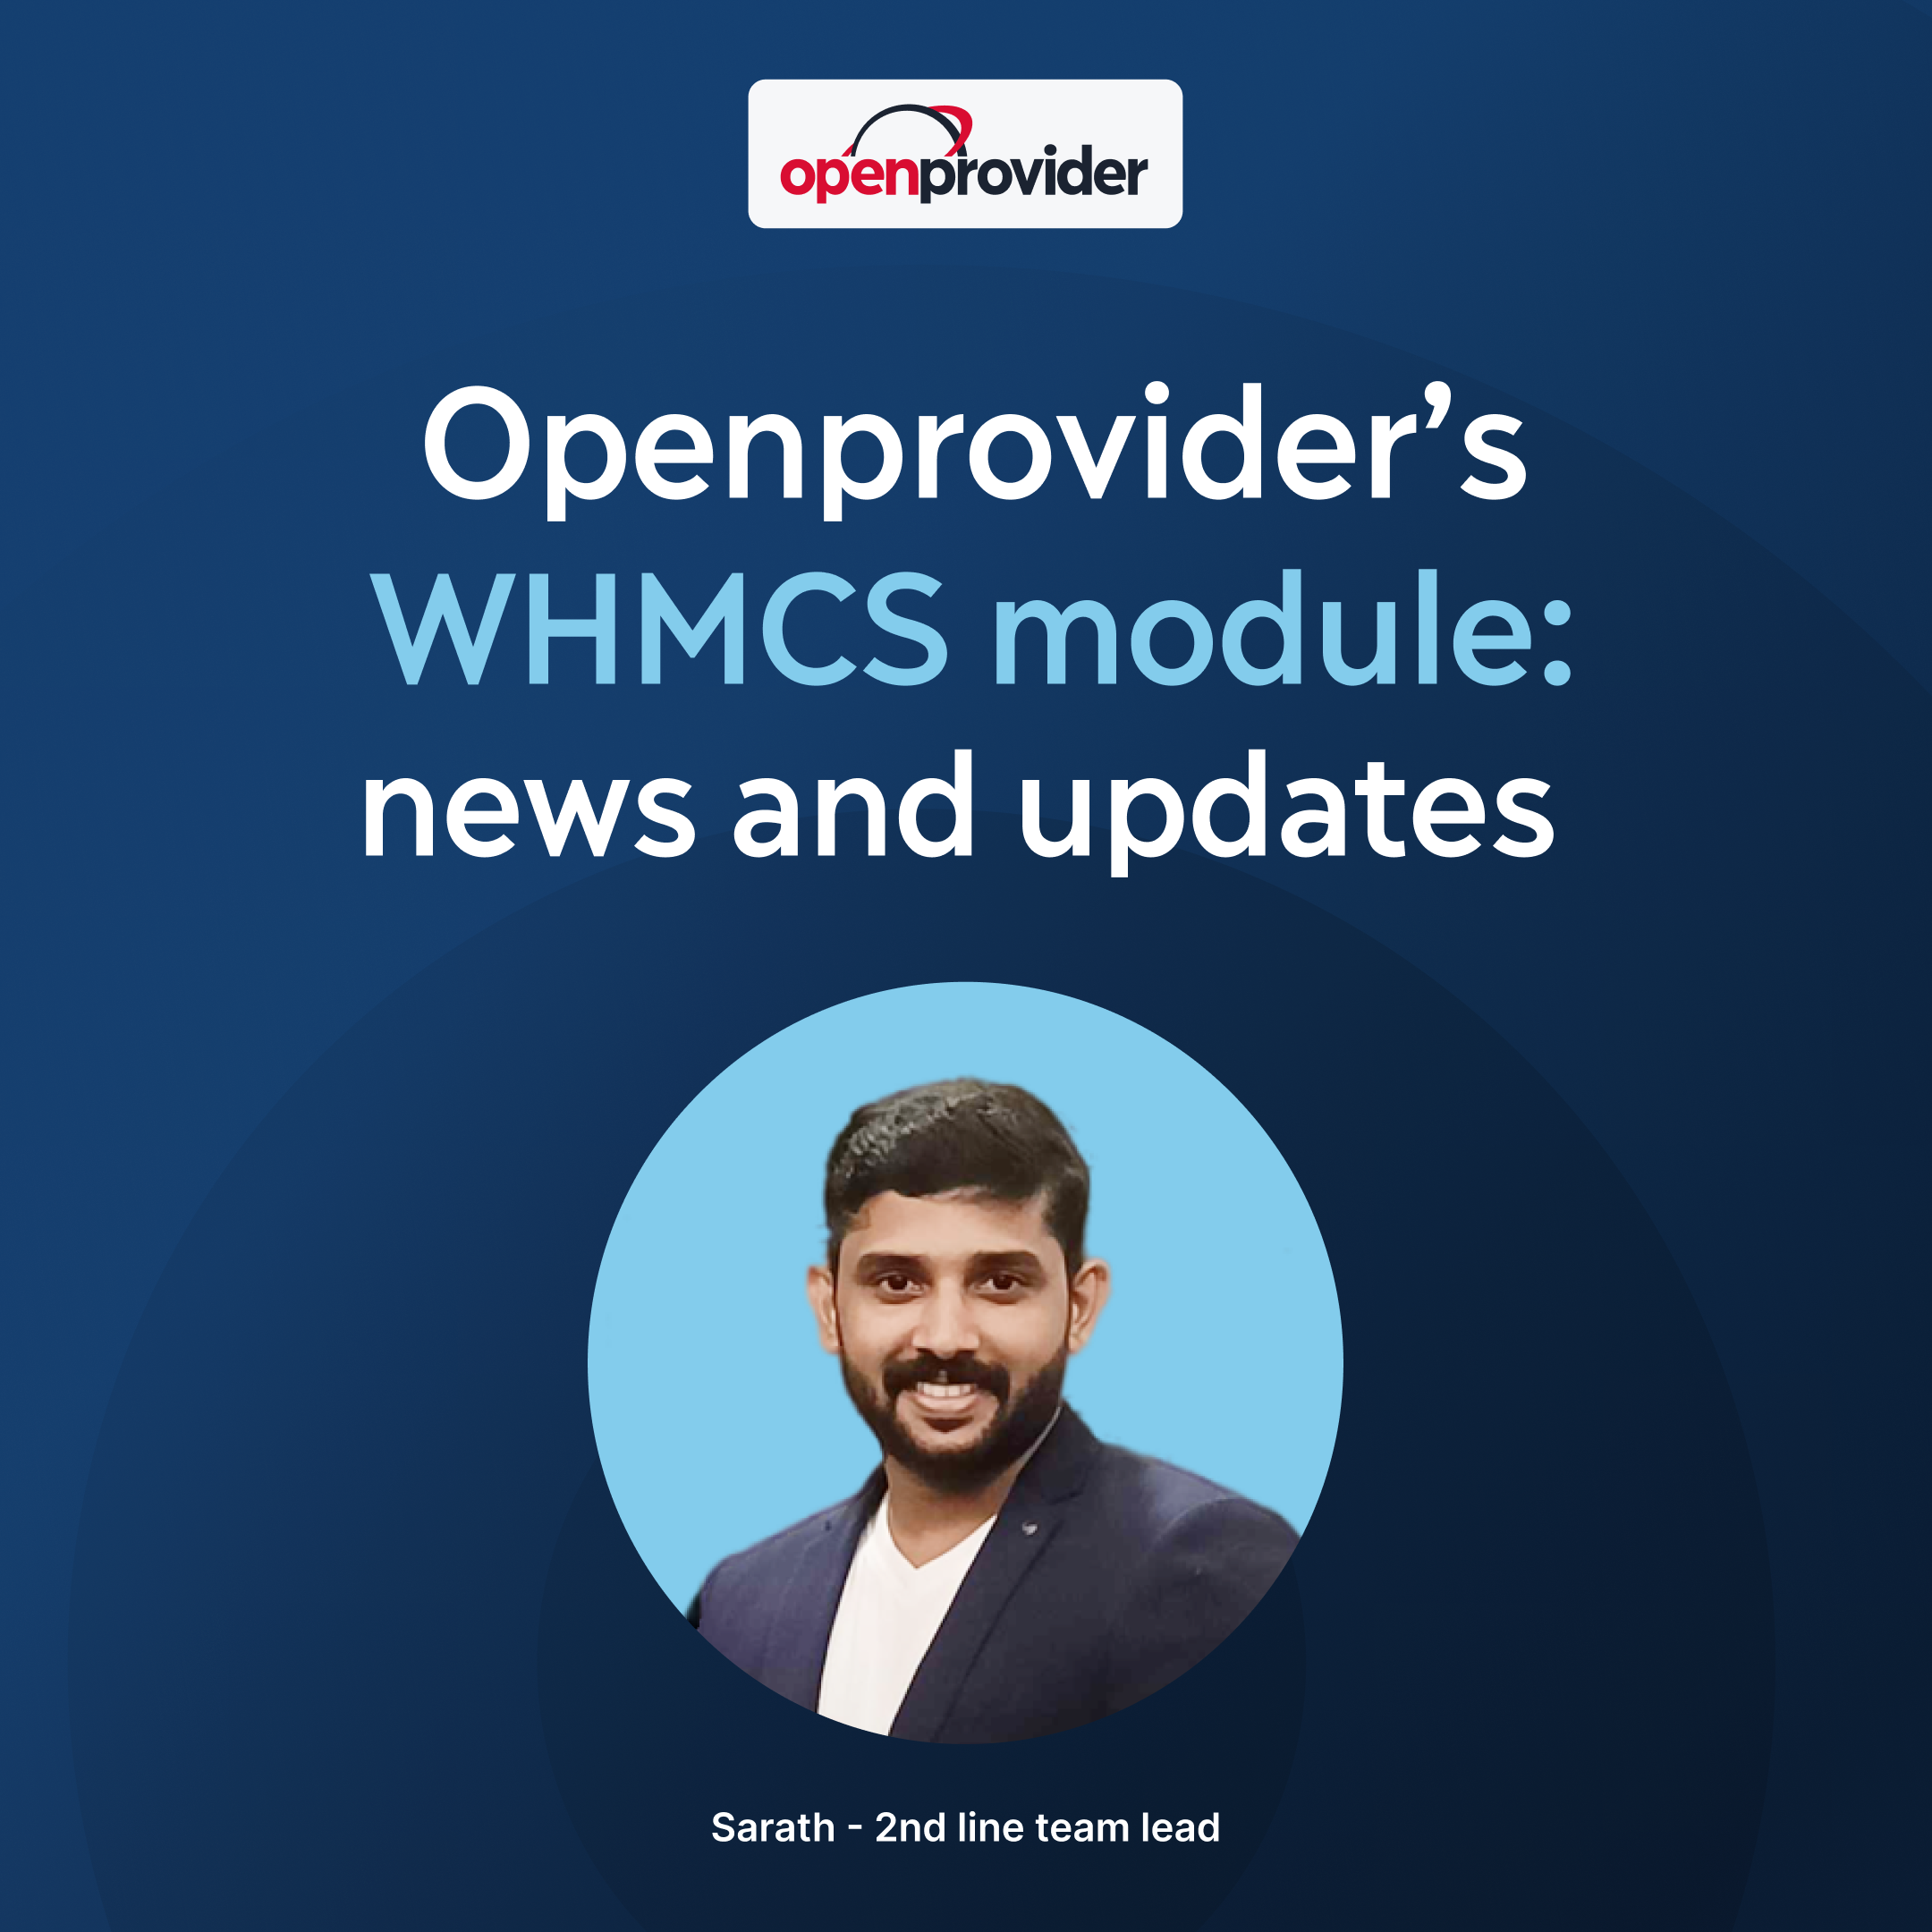 openprovider whmcs module: news and updates